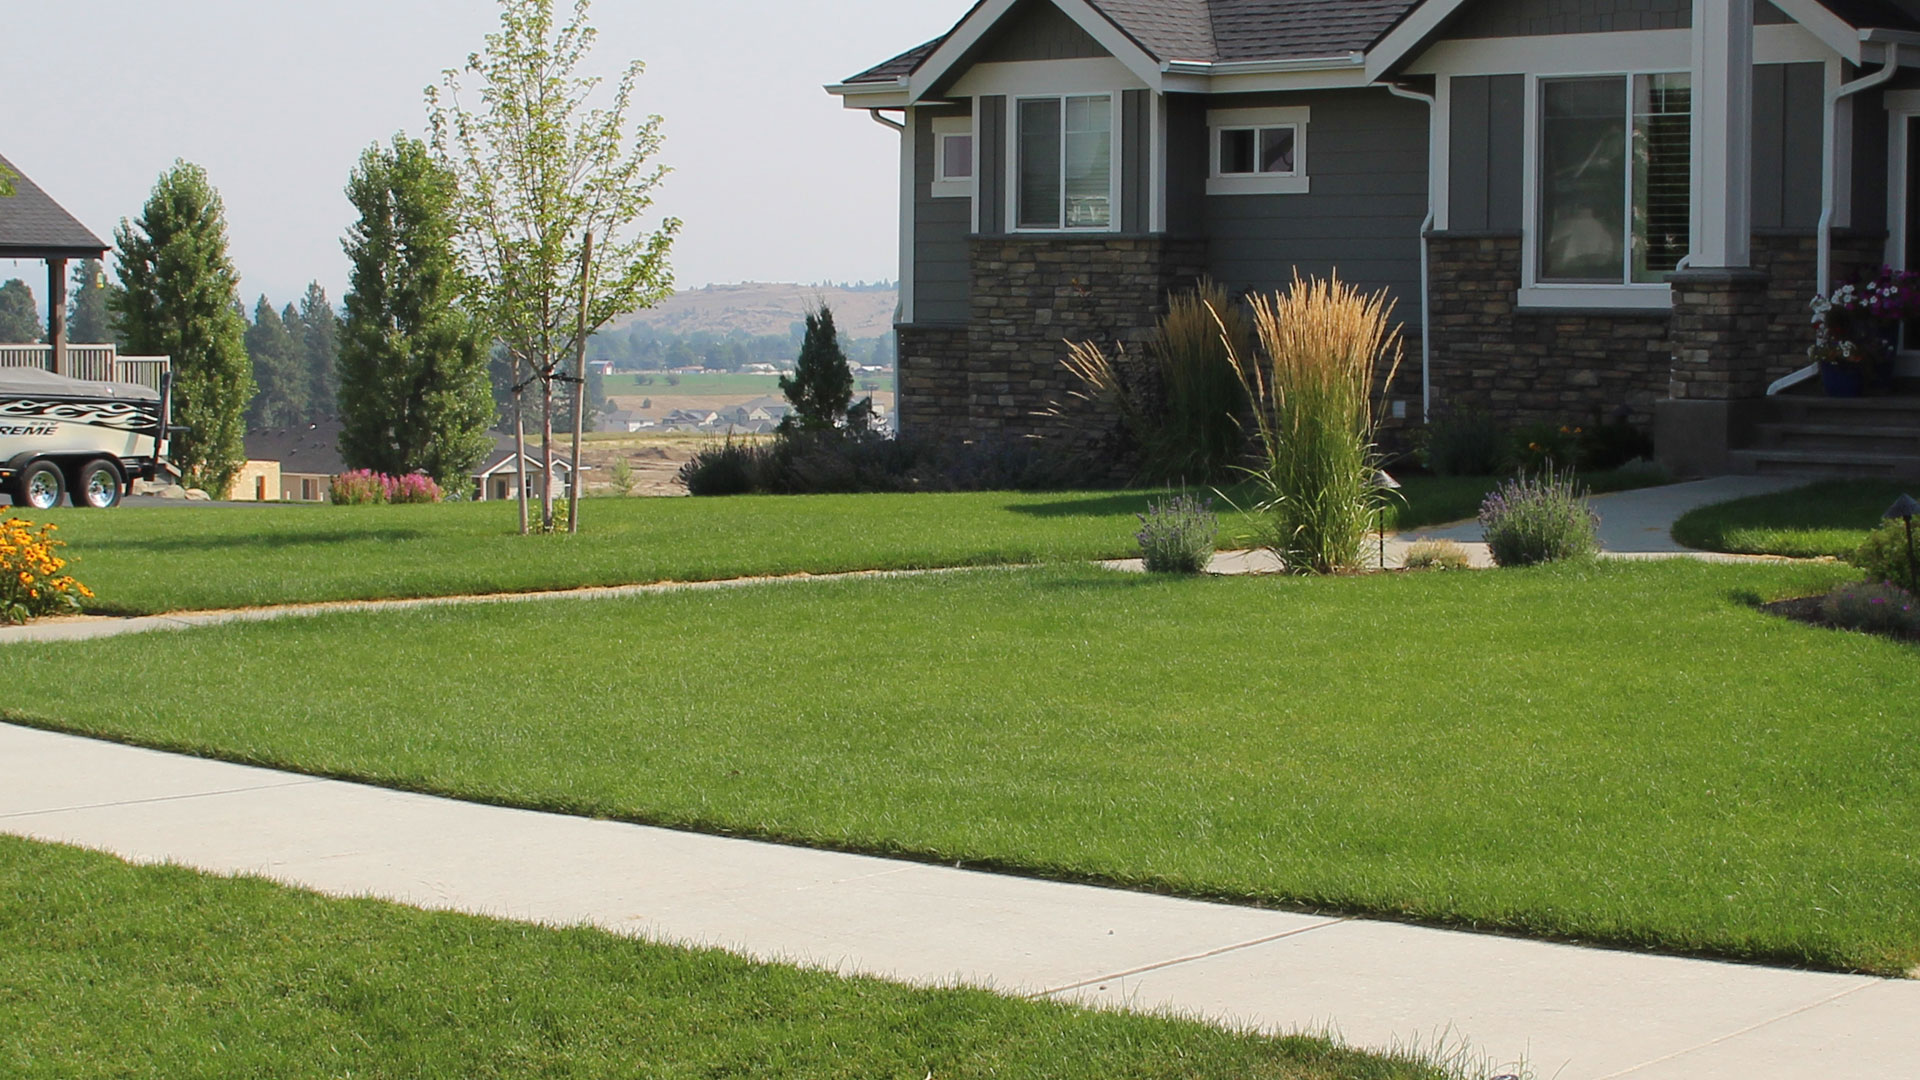 Millwood, WA home with excellent lawn care services.